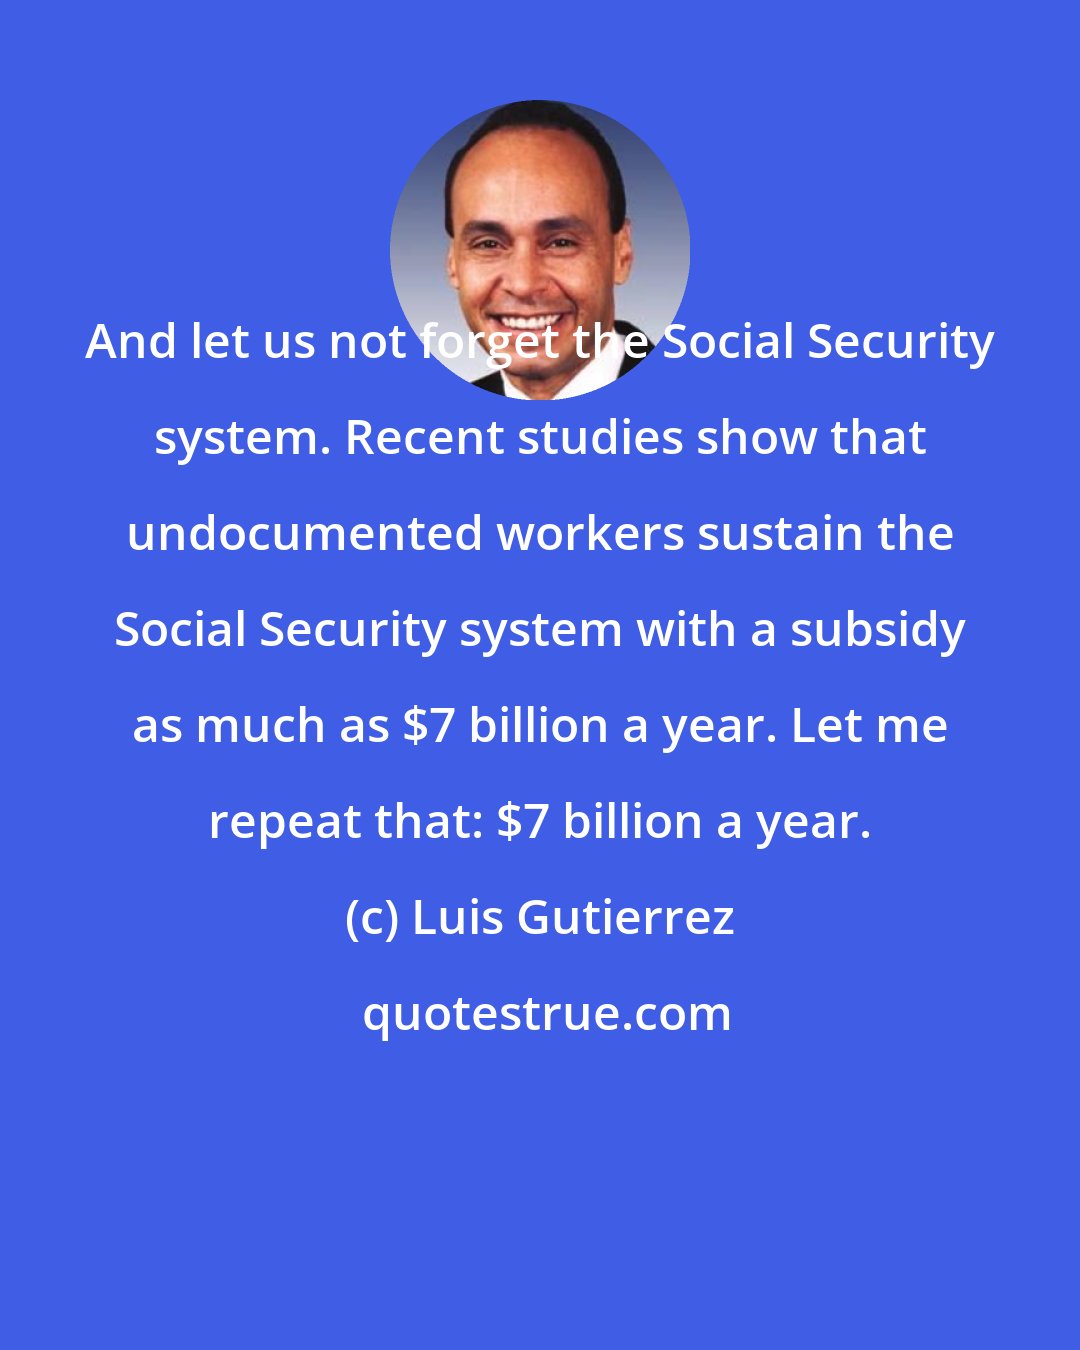 Luis Gutierrez: And let us not forget the Social Security system. Recent studies show that undocumented workers sustain the Social Security system with a subsidy as much as $7 billion a year. Let me repeat that: $7 billion a year.